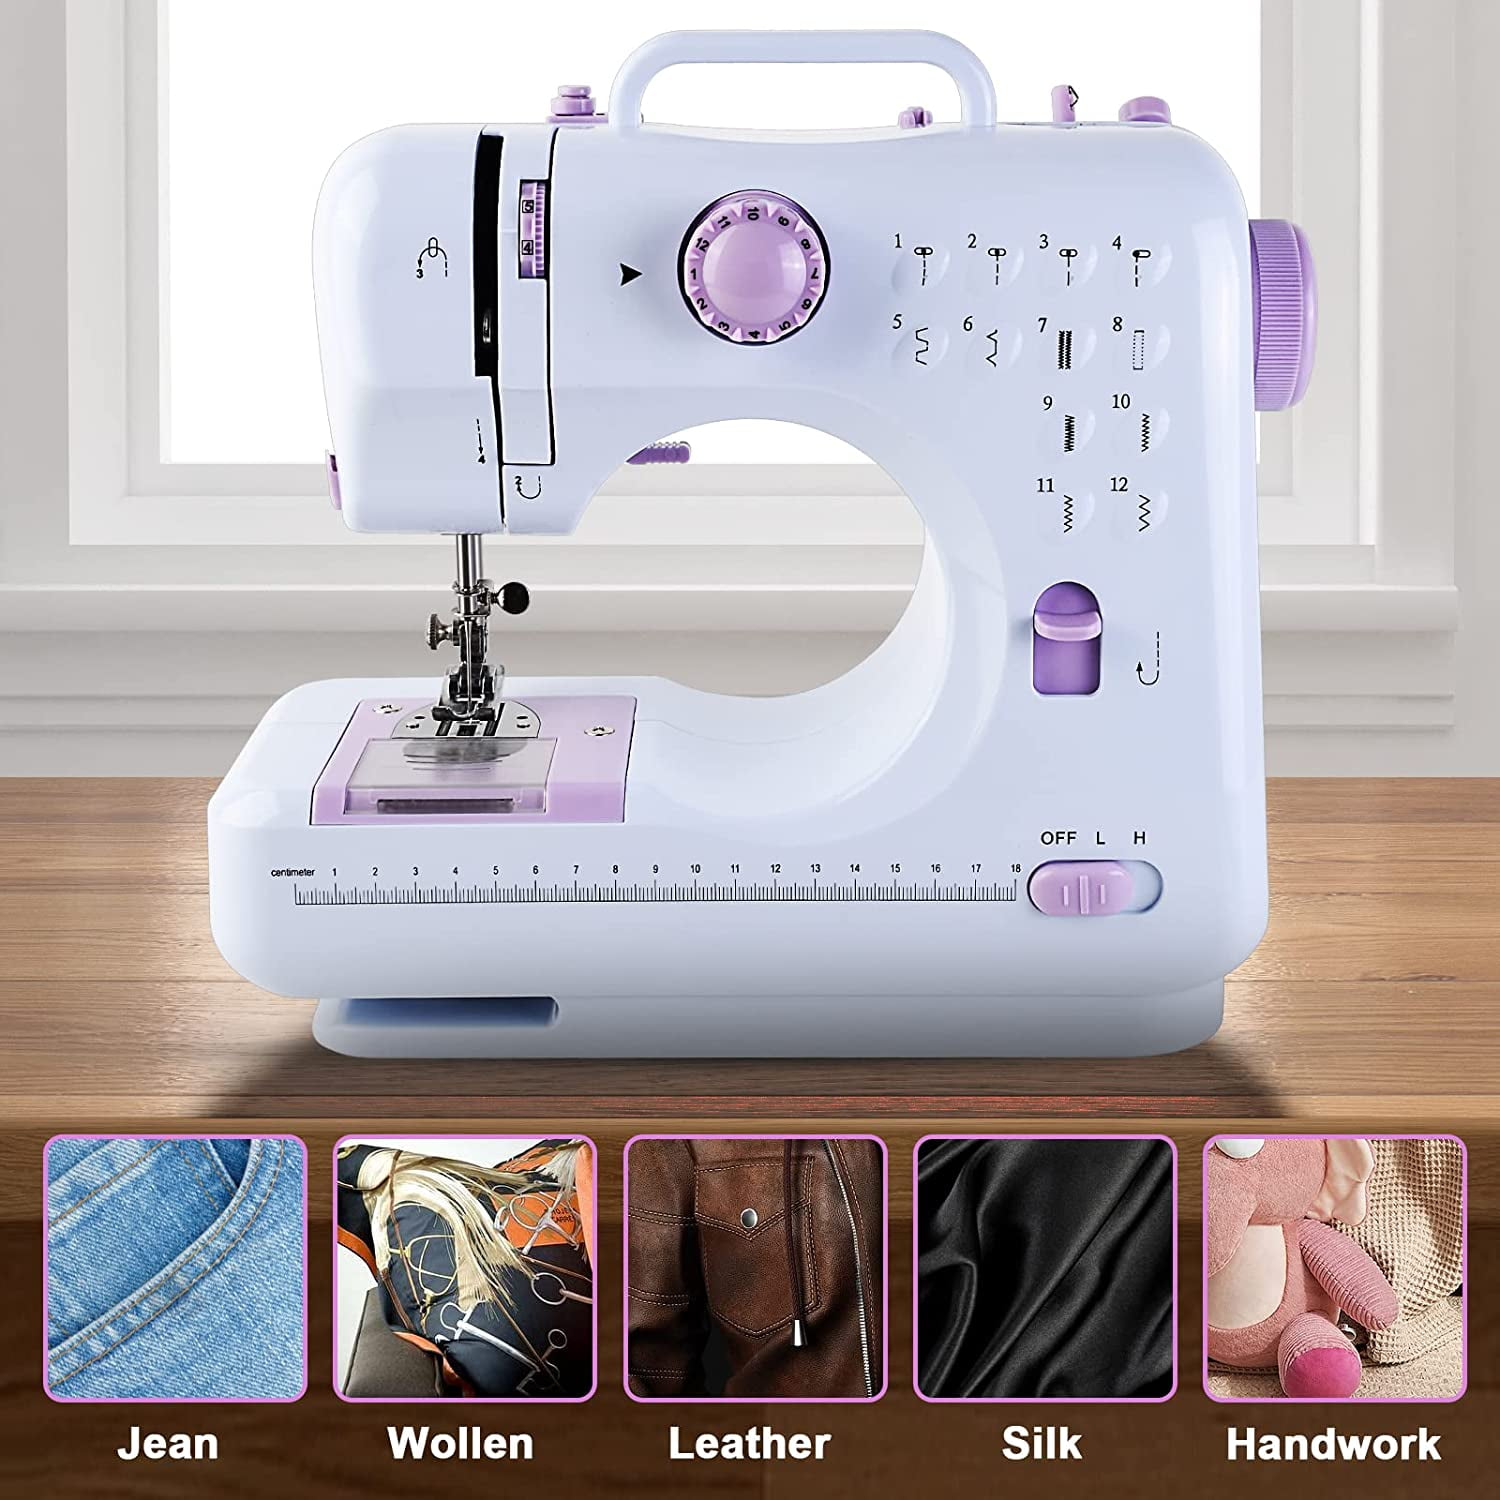 LRDCREEE Portable Sewing Machine for Beginners and Kids with 12 Built-in  Stitches,Reverse Sewing and Extension Table Mini Sewing Machine Dual Speed